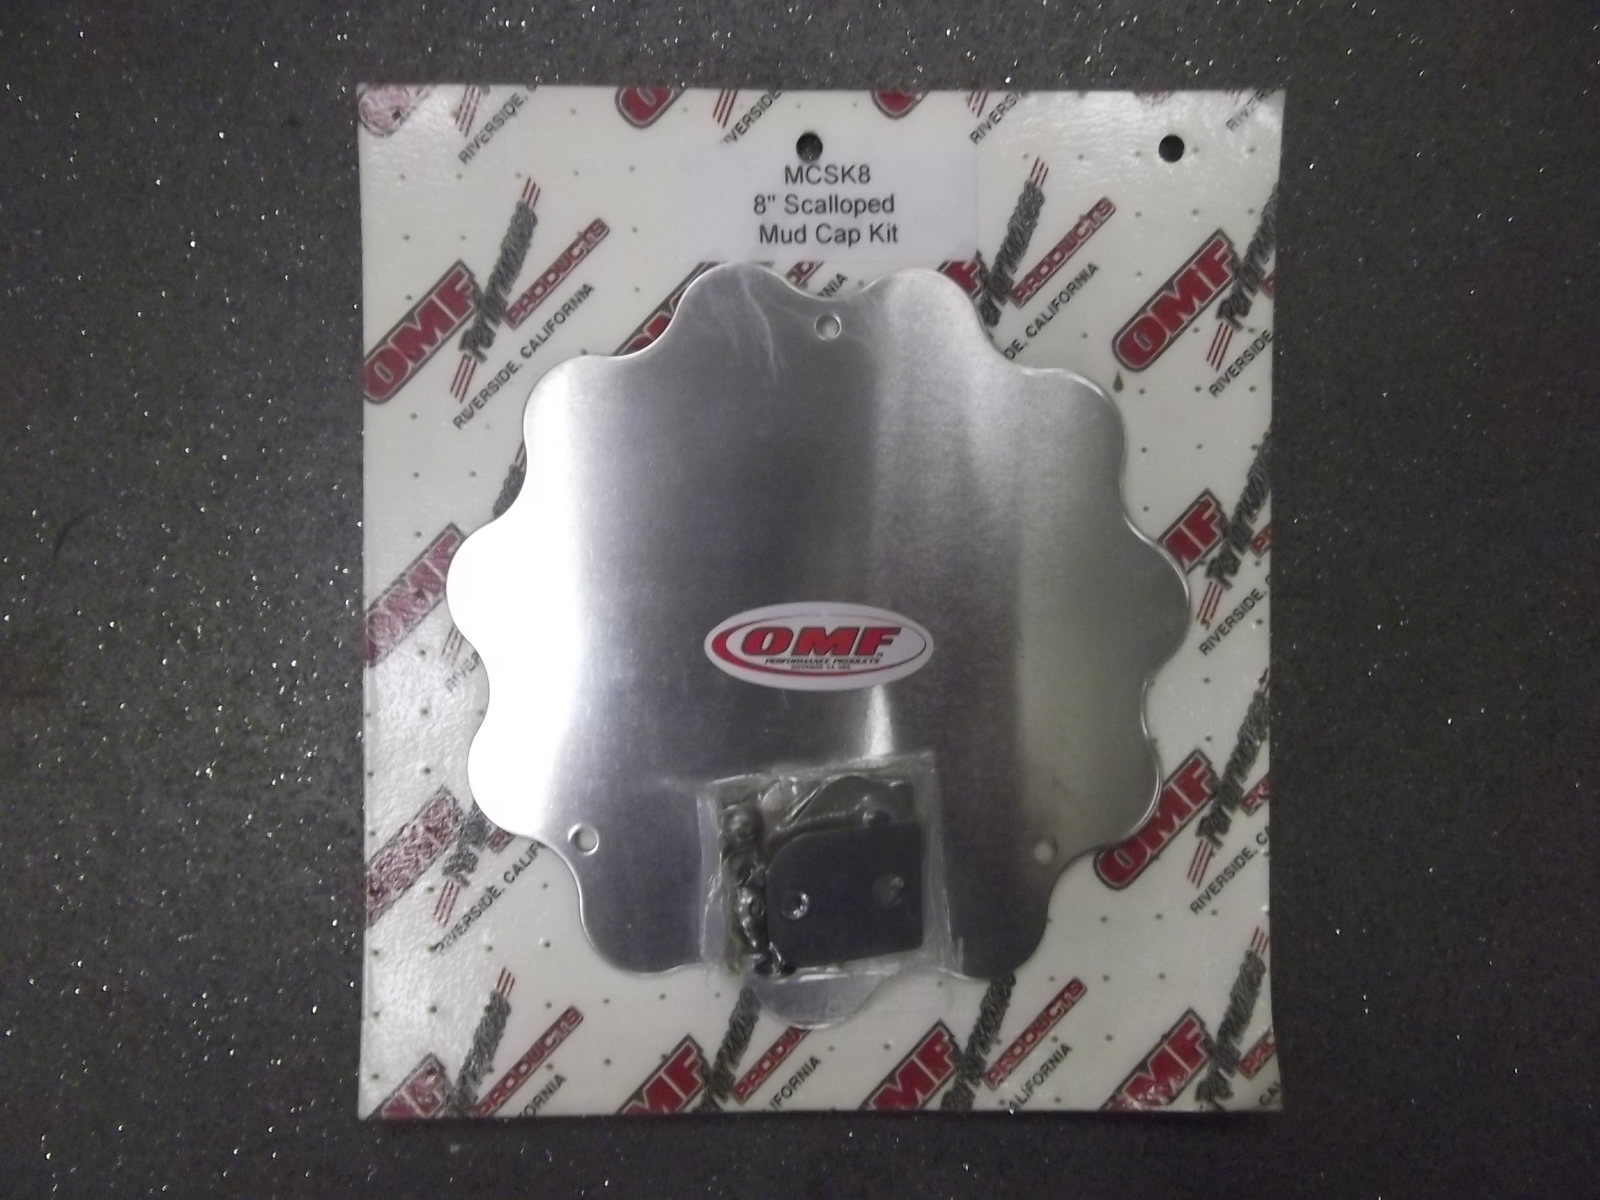 OMF PERFORMANCE PRODUCTS SILVER 8" SCALLOPED MUD CAP KIT MCSK8